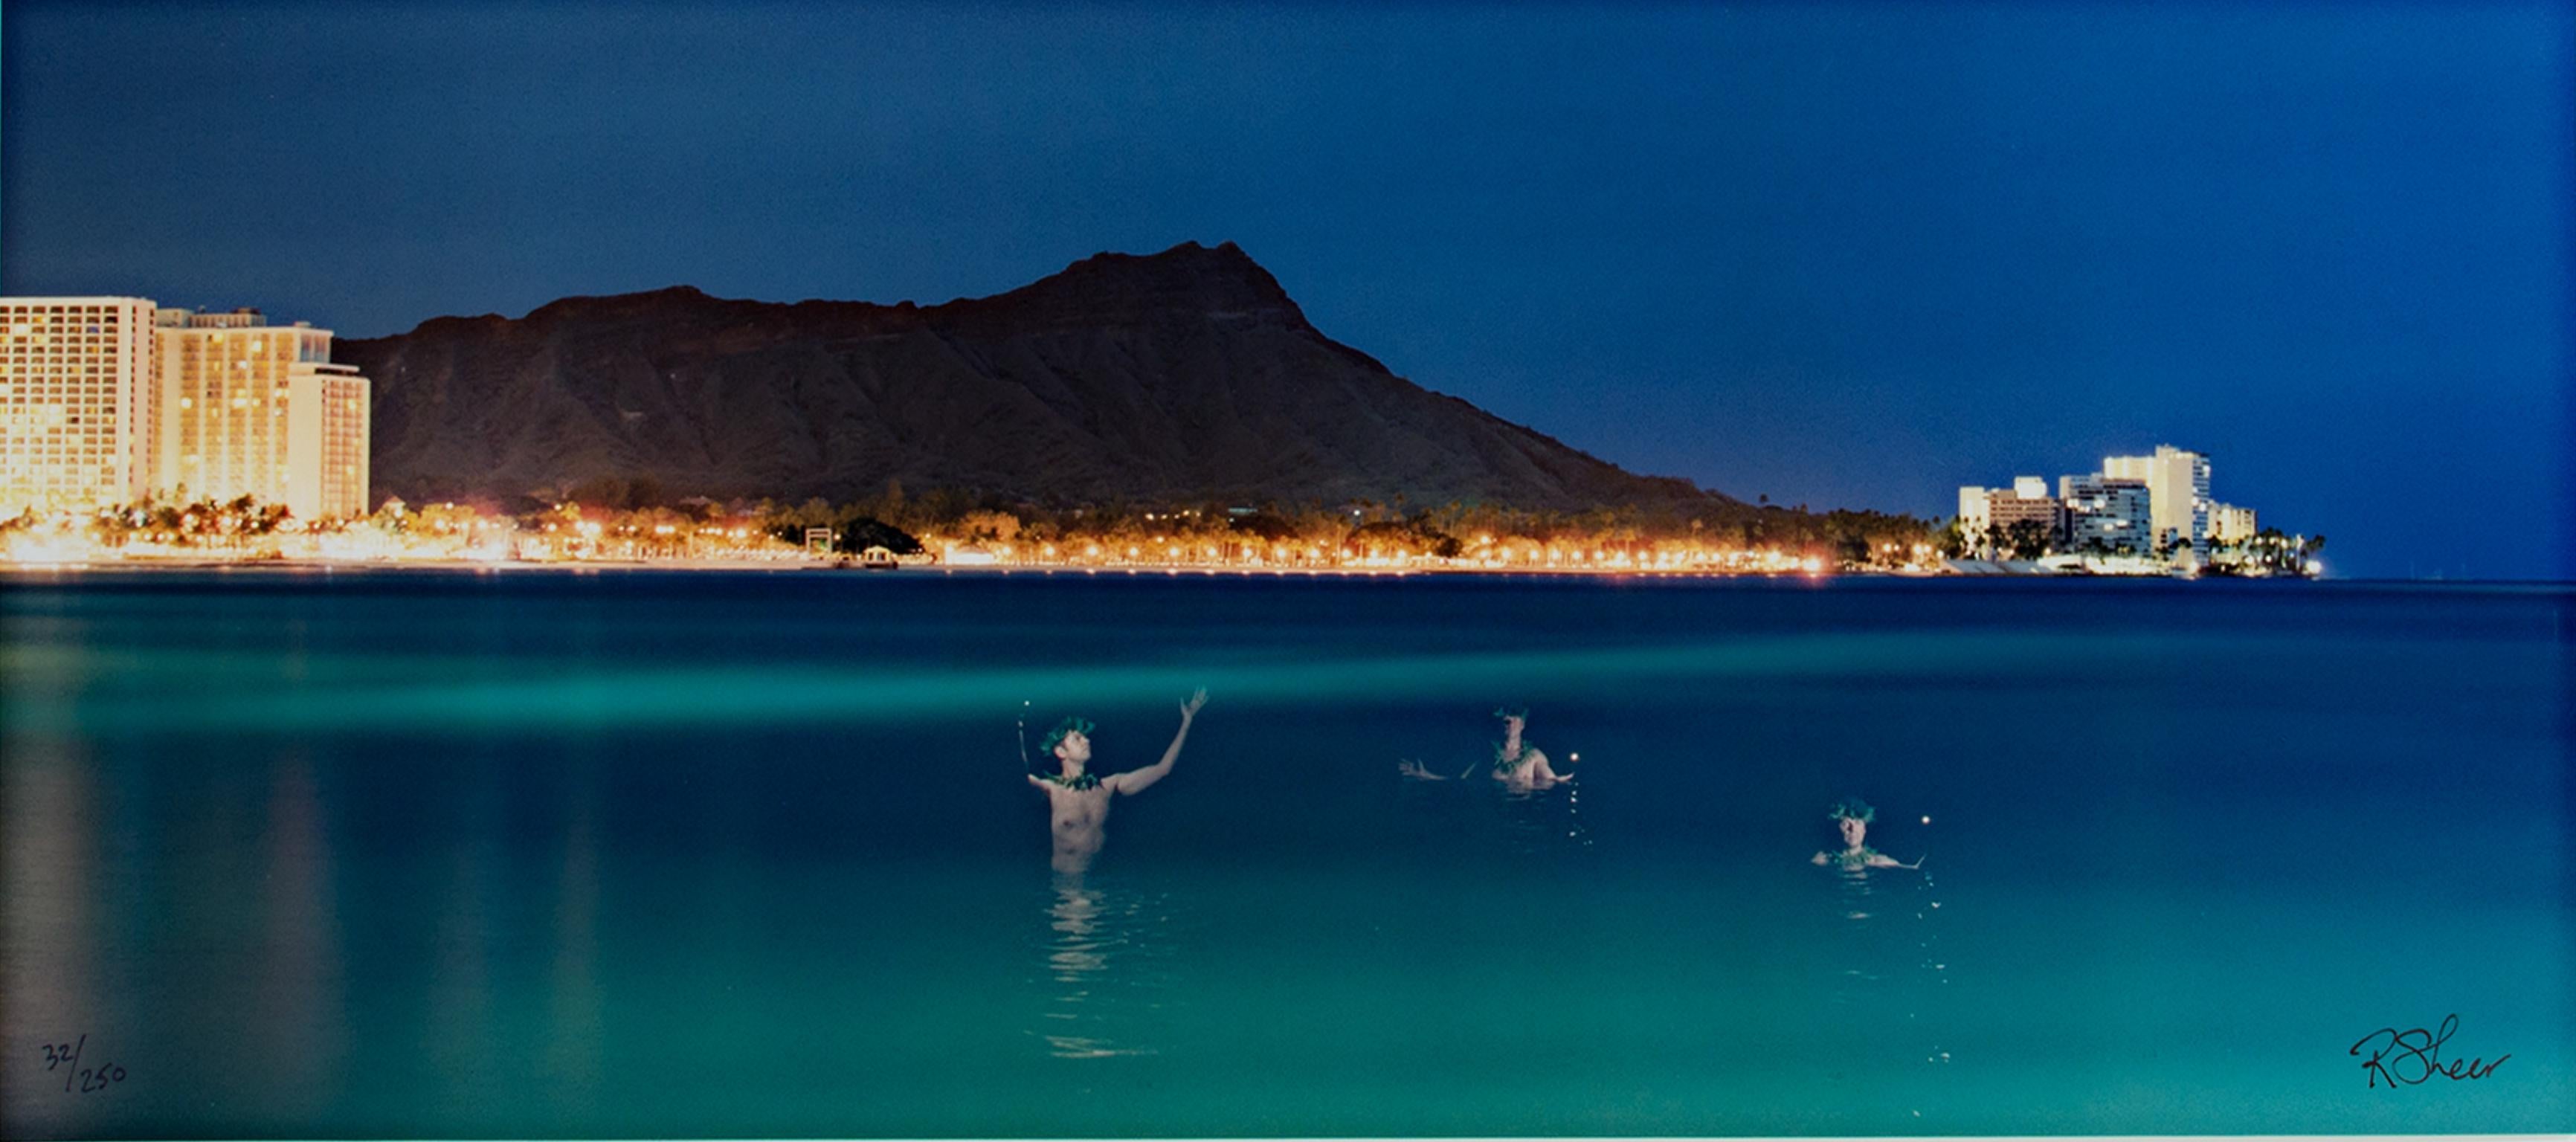 "Three Hawaiian Spirits at Waikiki" is an original fine-art chromogenic photograph by Robert Kawika Sheer. The image is signed in the lower right and editioned in the lower left. Edition: 32/250. The image depicts the ocean, all in shades of blue